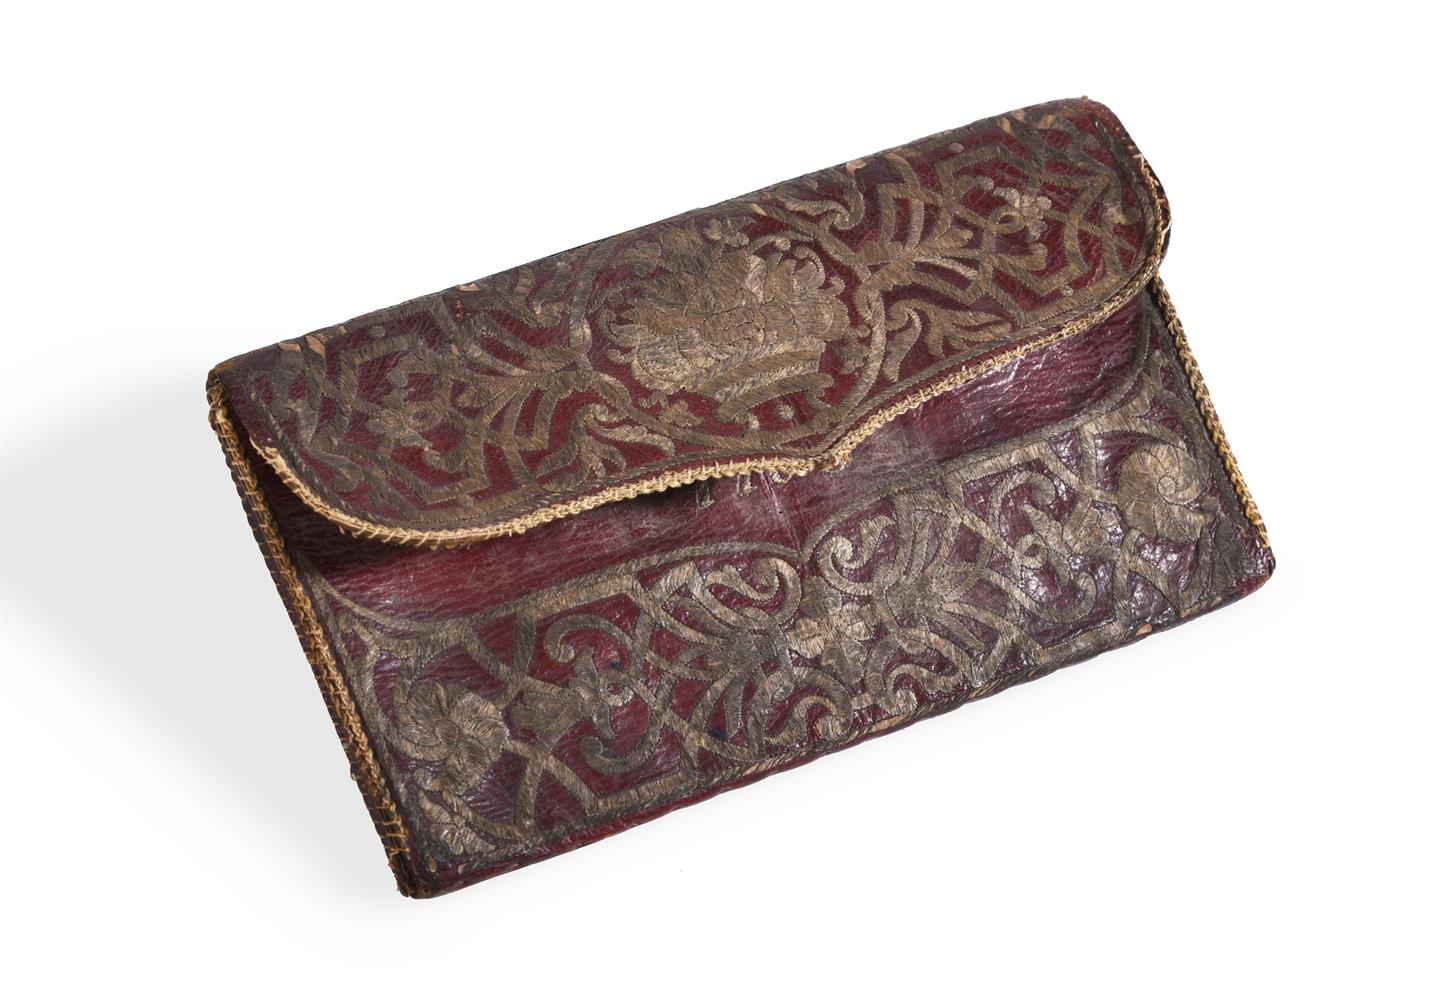 AN OTTOMAN METAL THREAD EMBROIDERED LEATHER PURSE, CONSTANTINOPLE, 1765 - Image 4 of 4